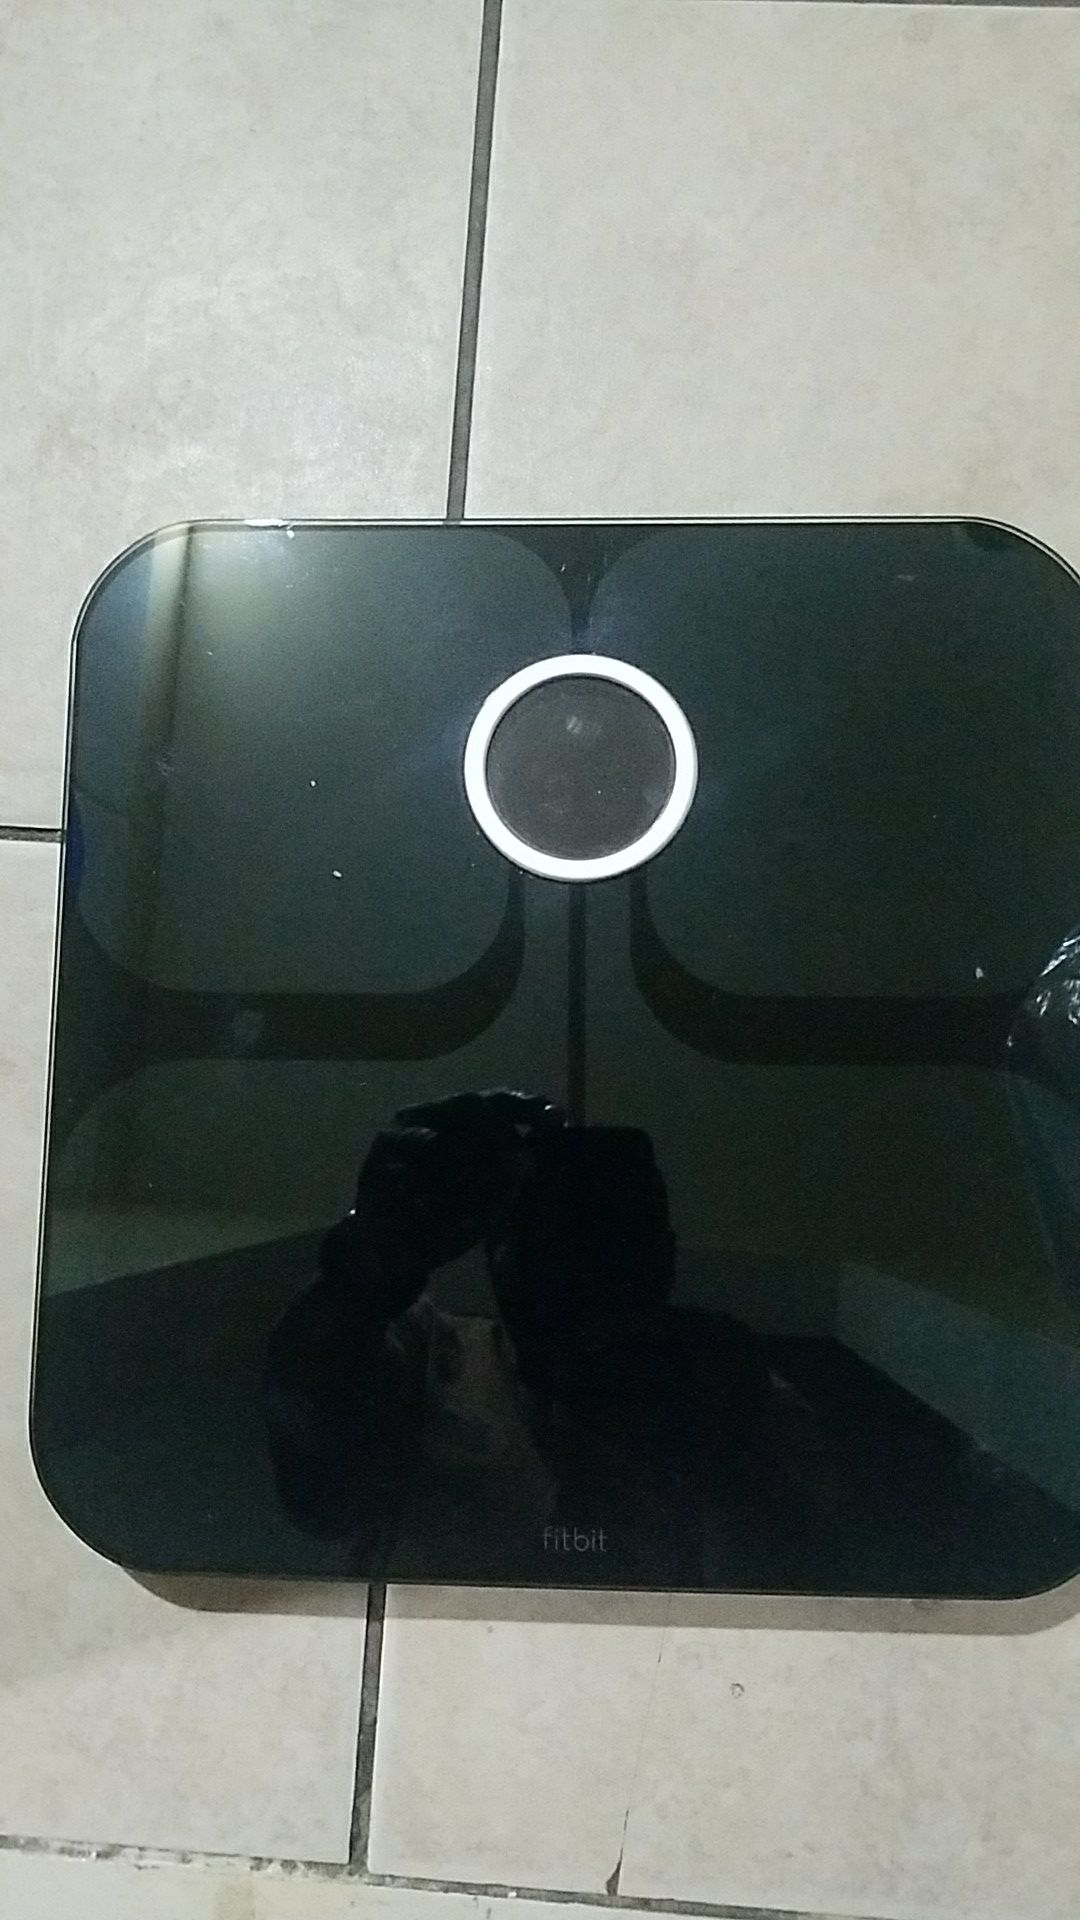 FITBIT SCALE